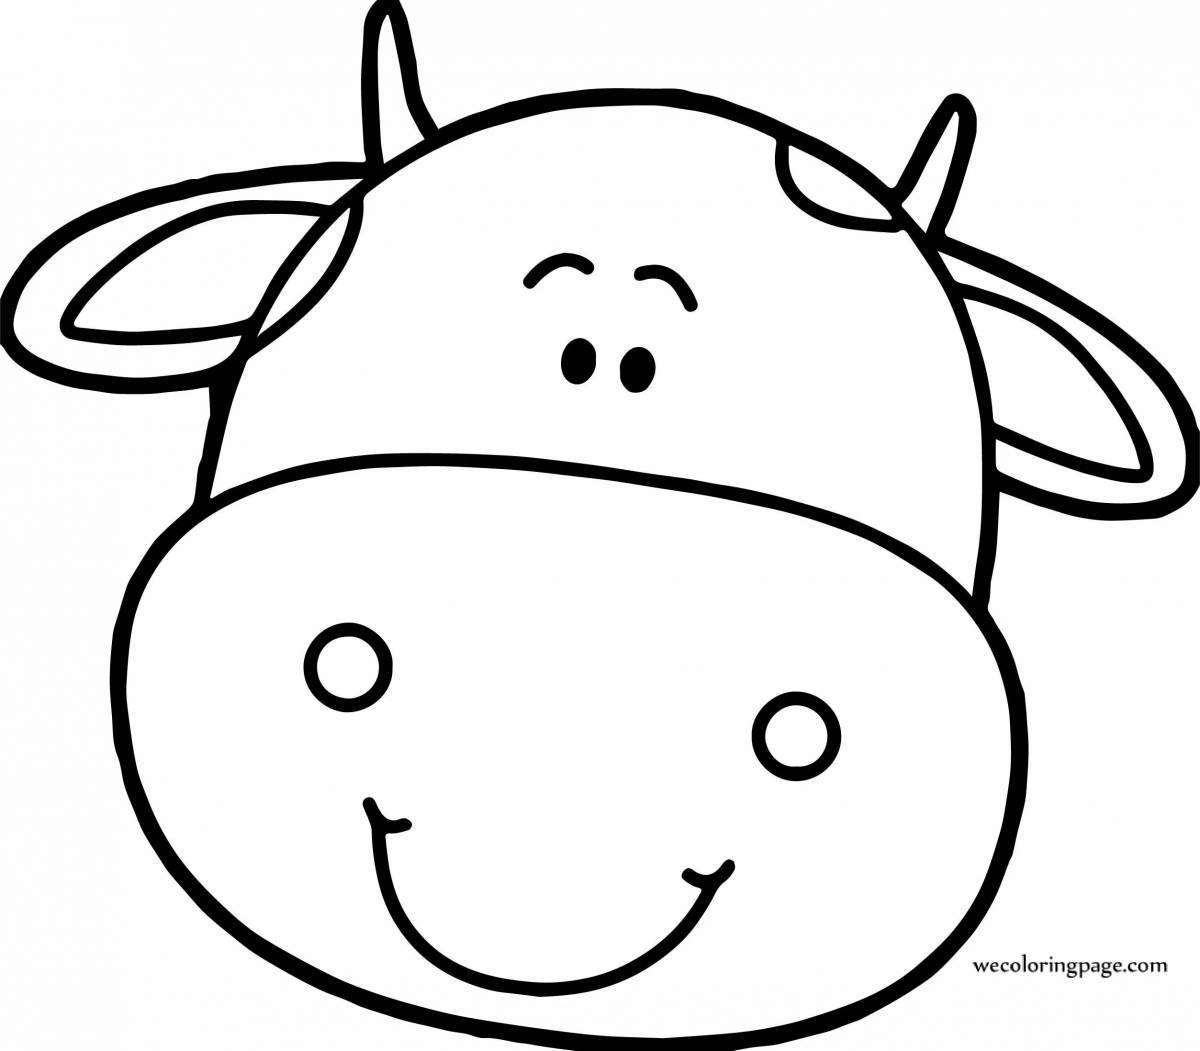 Playful cow head coloring page